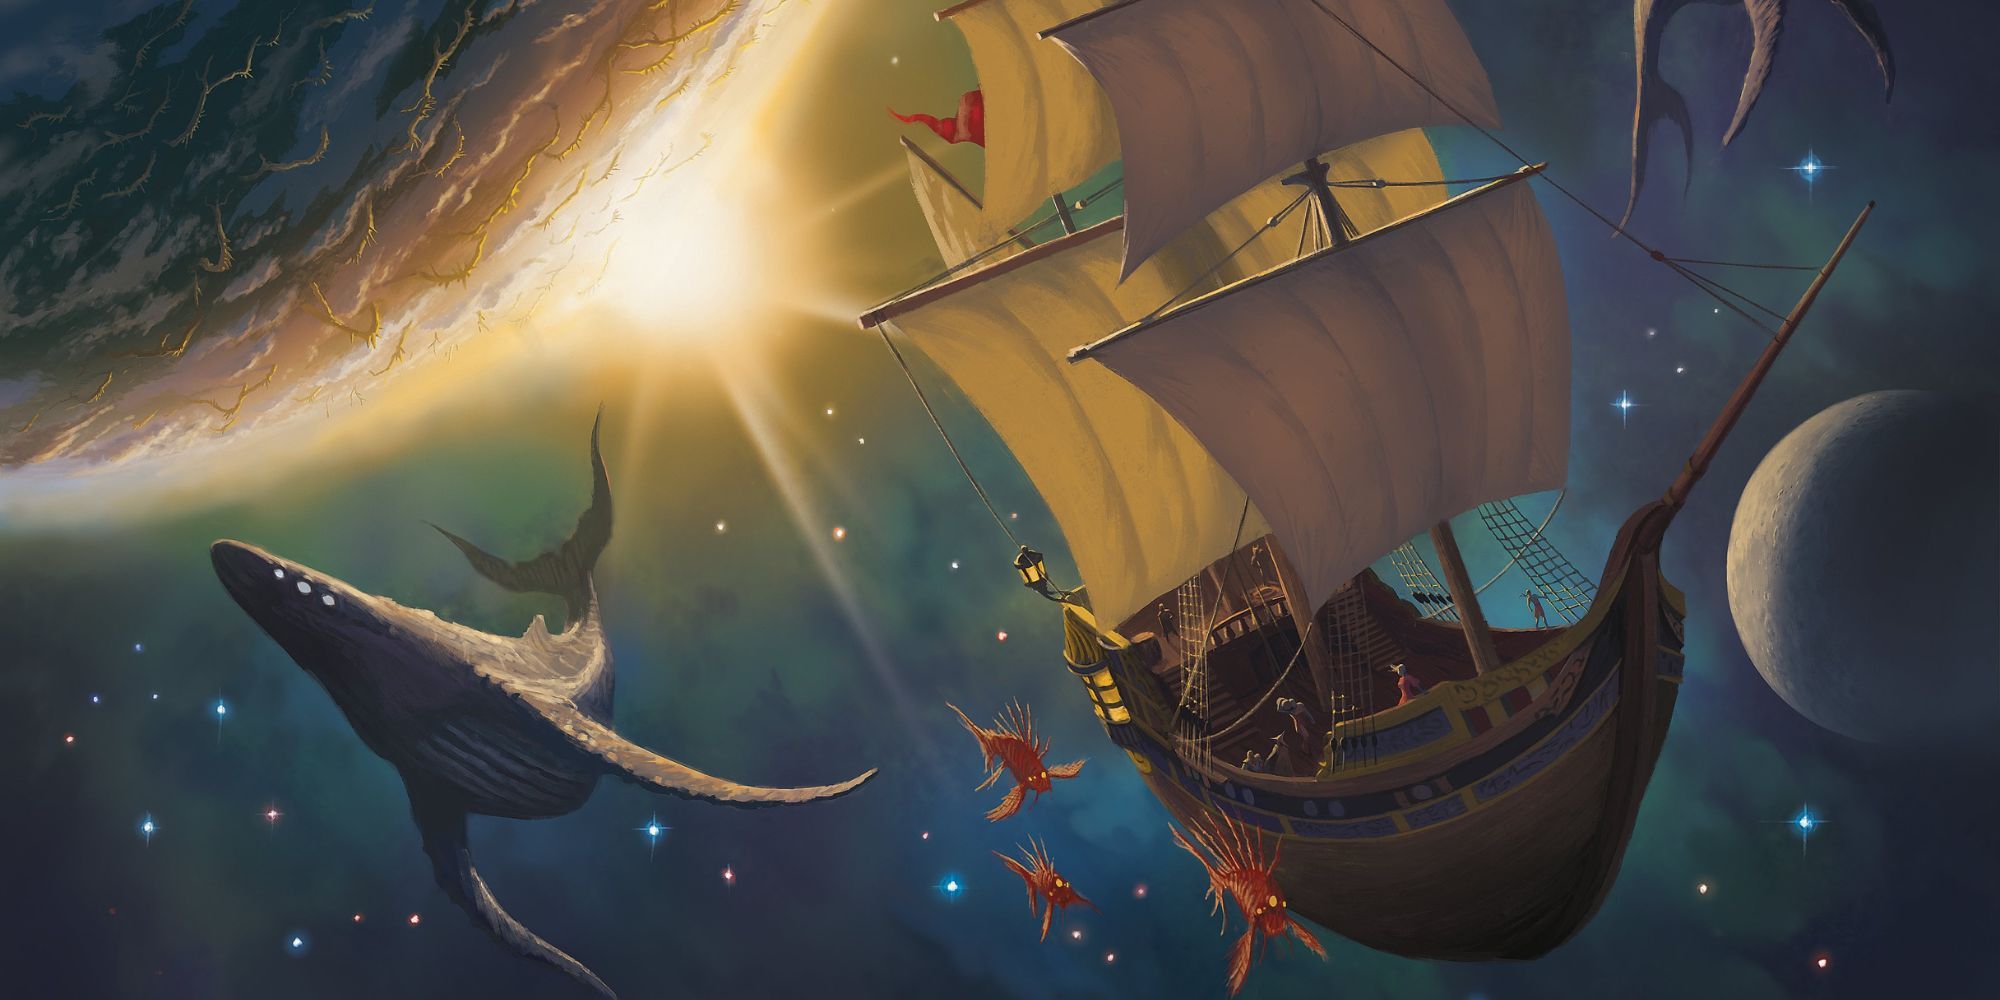 Boat in space with fish and whale, sun cresting planet behind